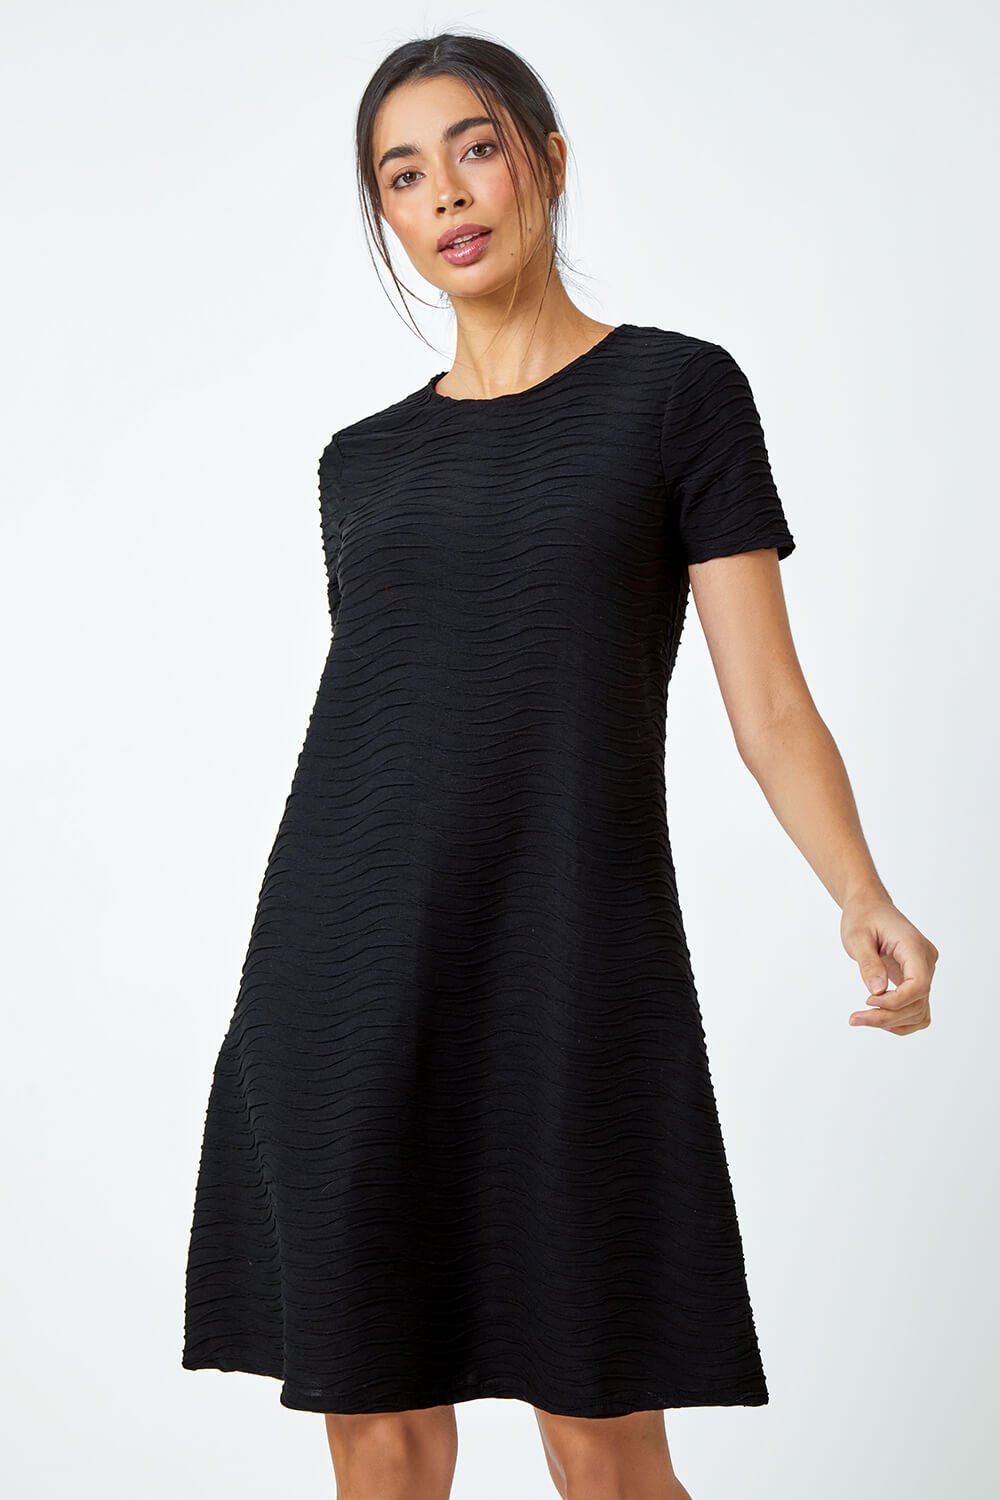 Black Textured A-Line Stretch Dress, Image 2 of 5